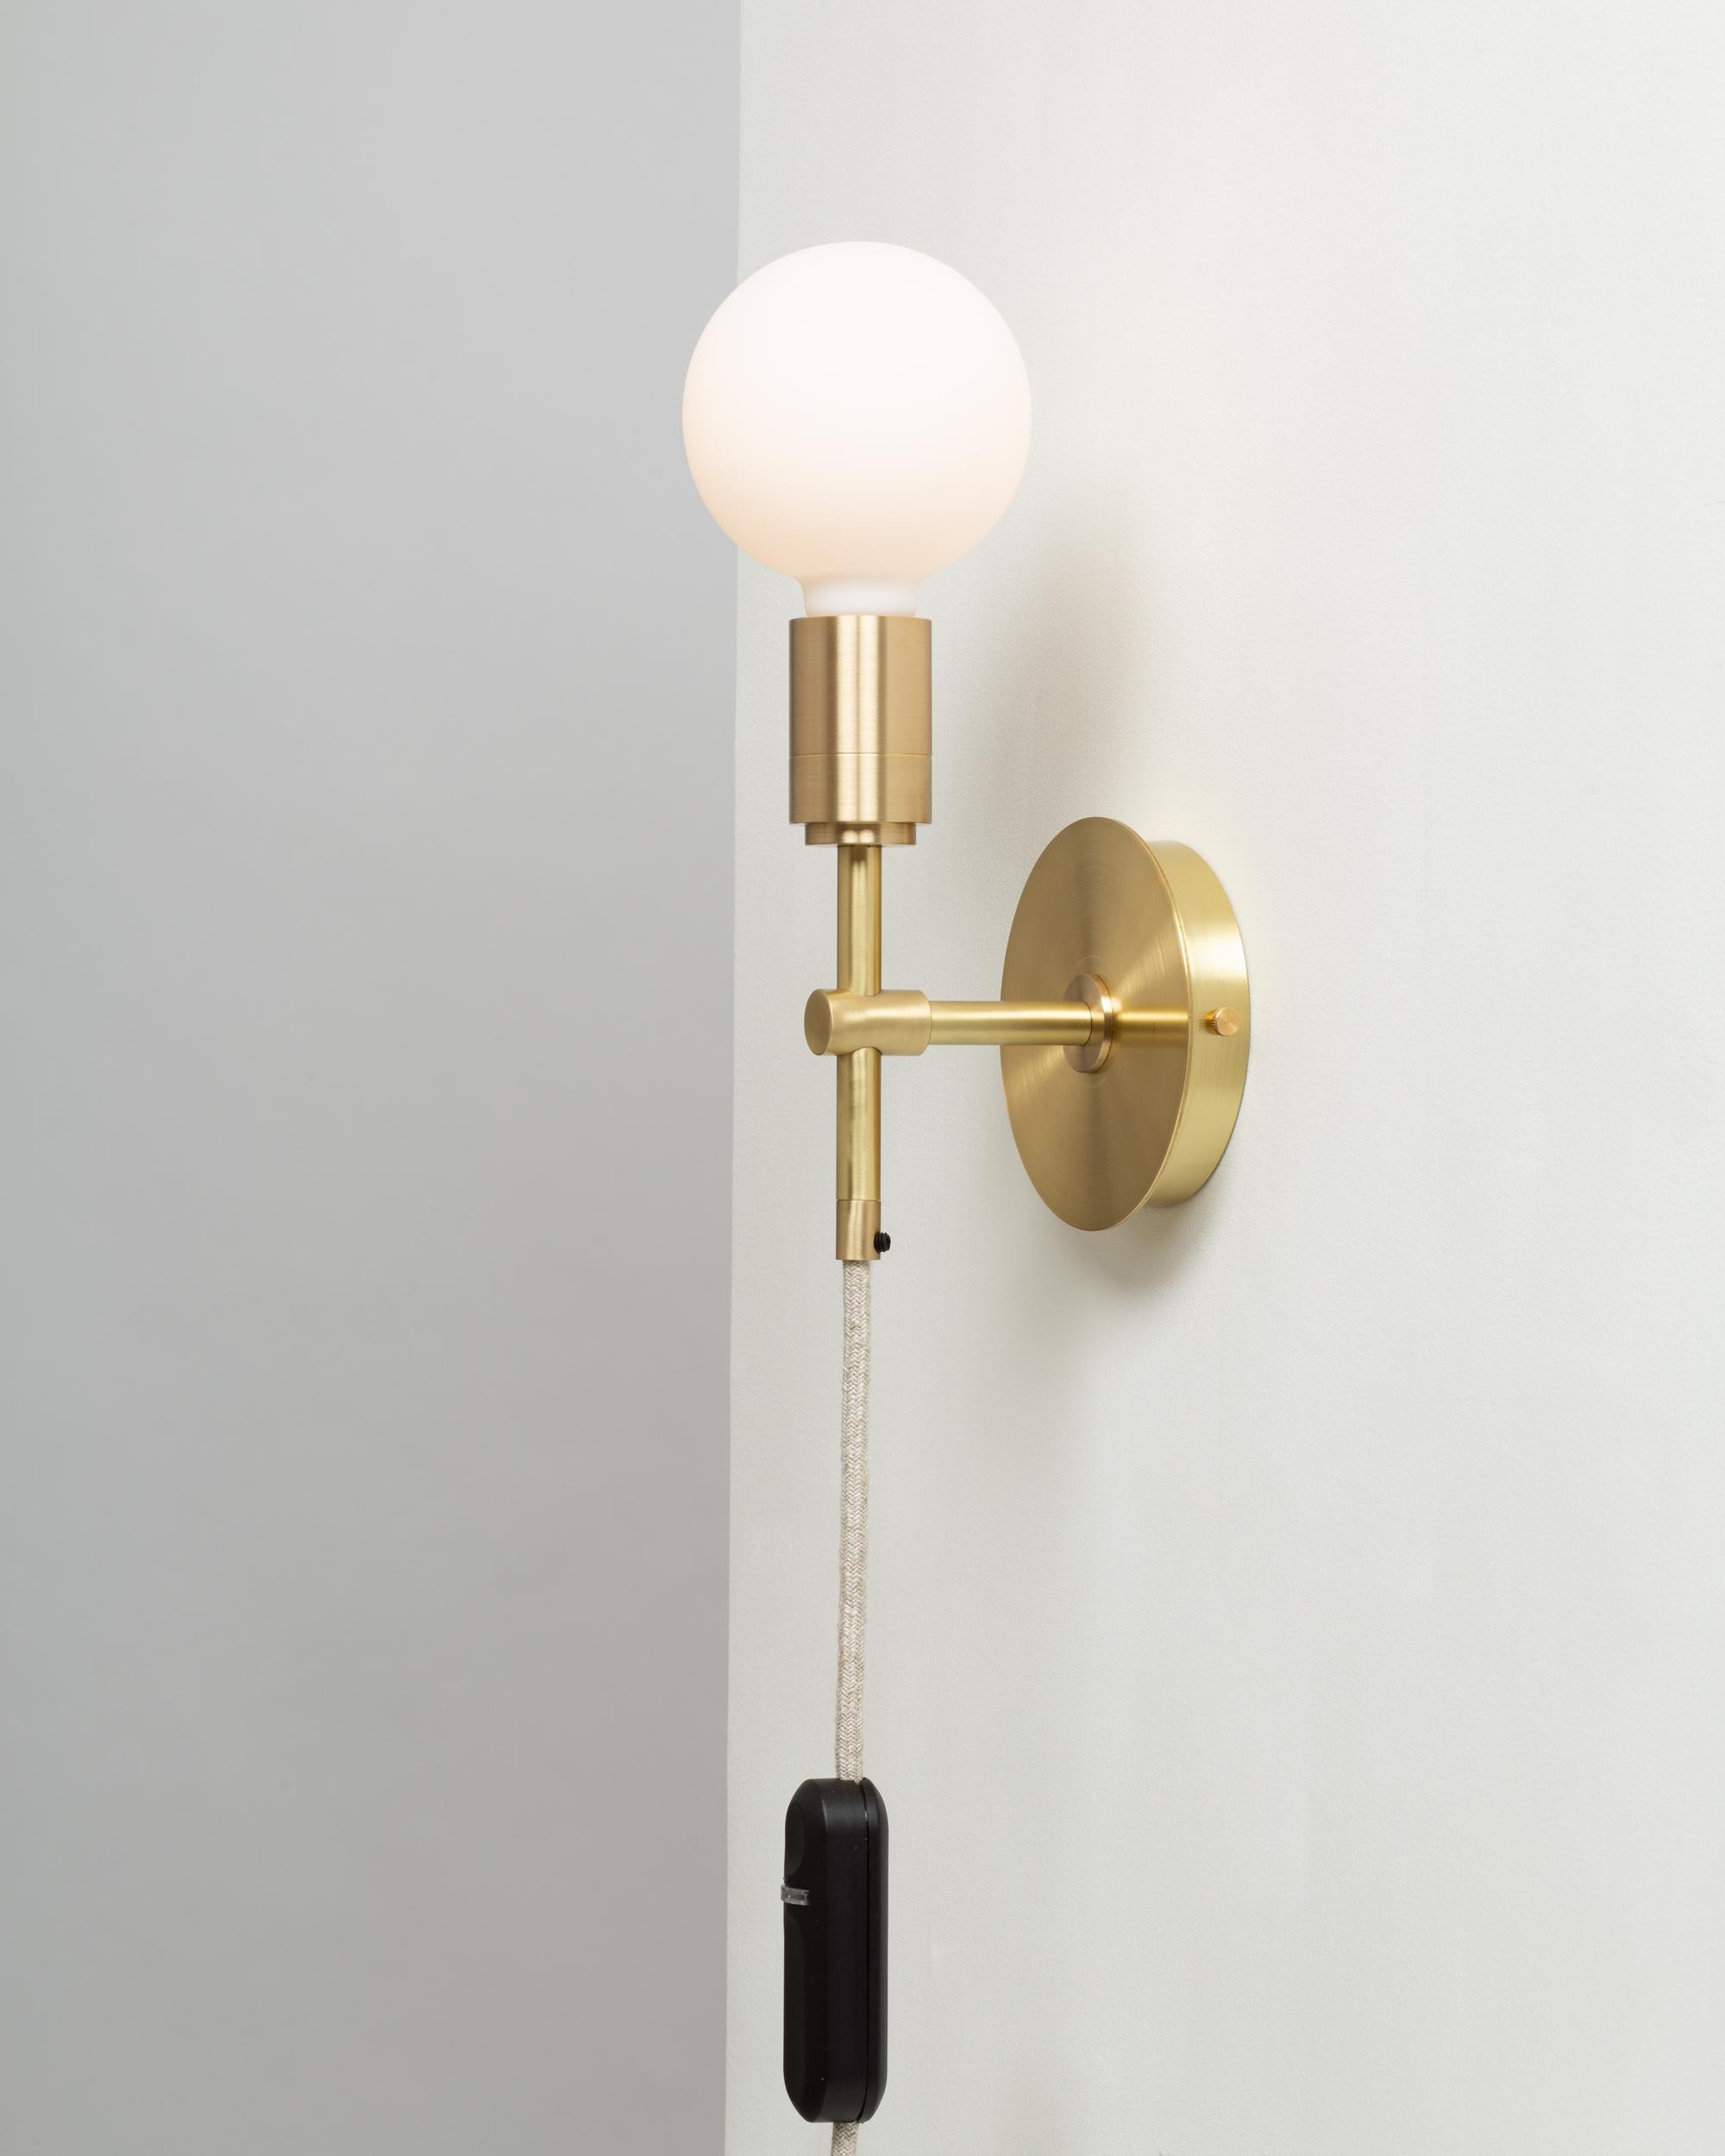 Modern Sphere Stem Wall Mount Sconce Integrated Dimmer by Lights of London For Sale